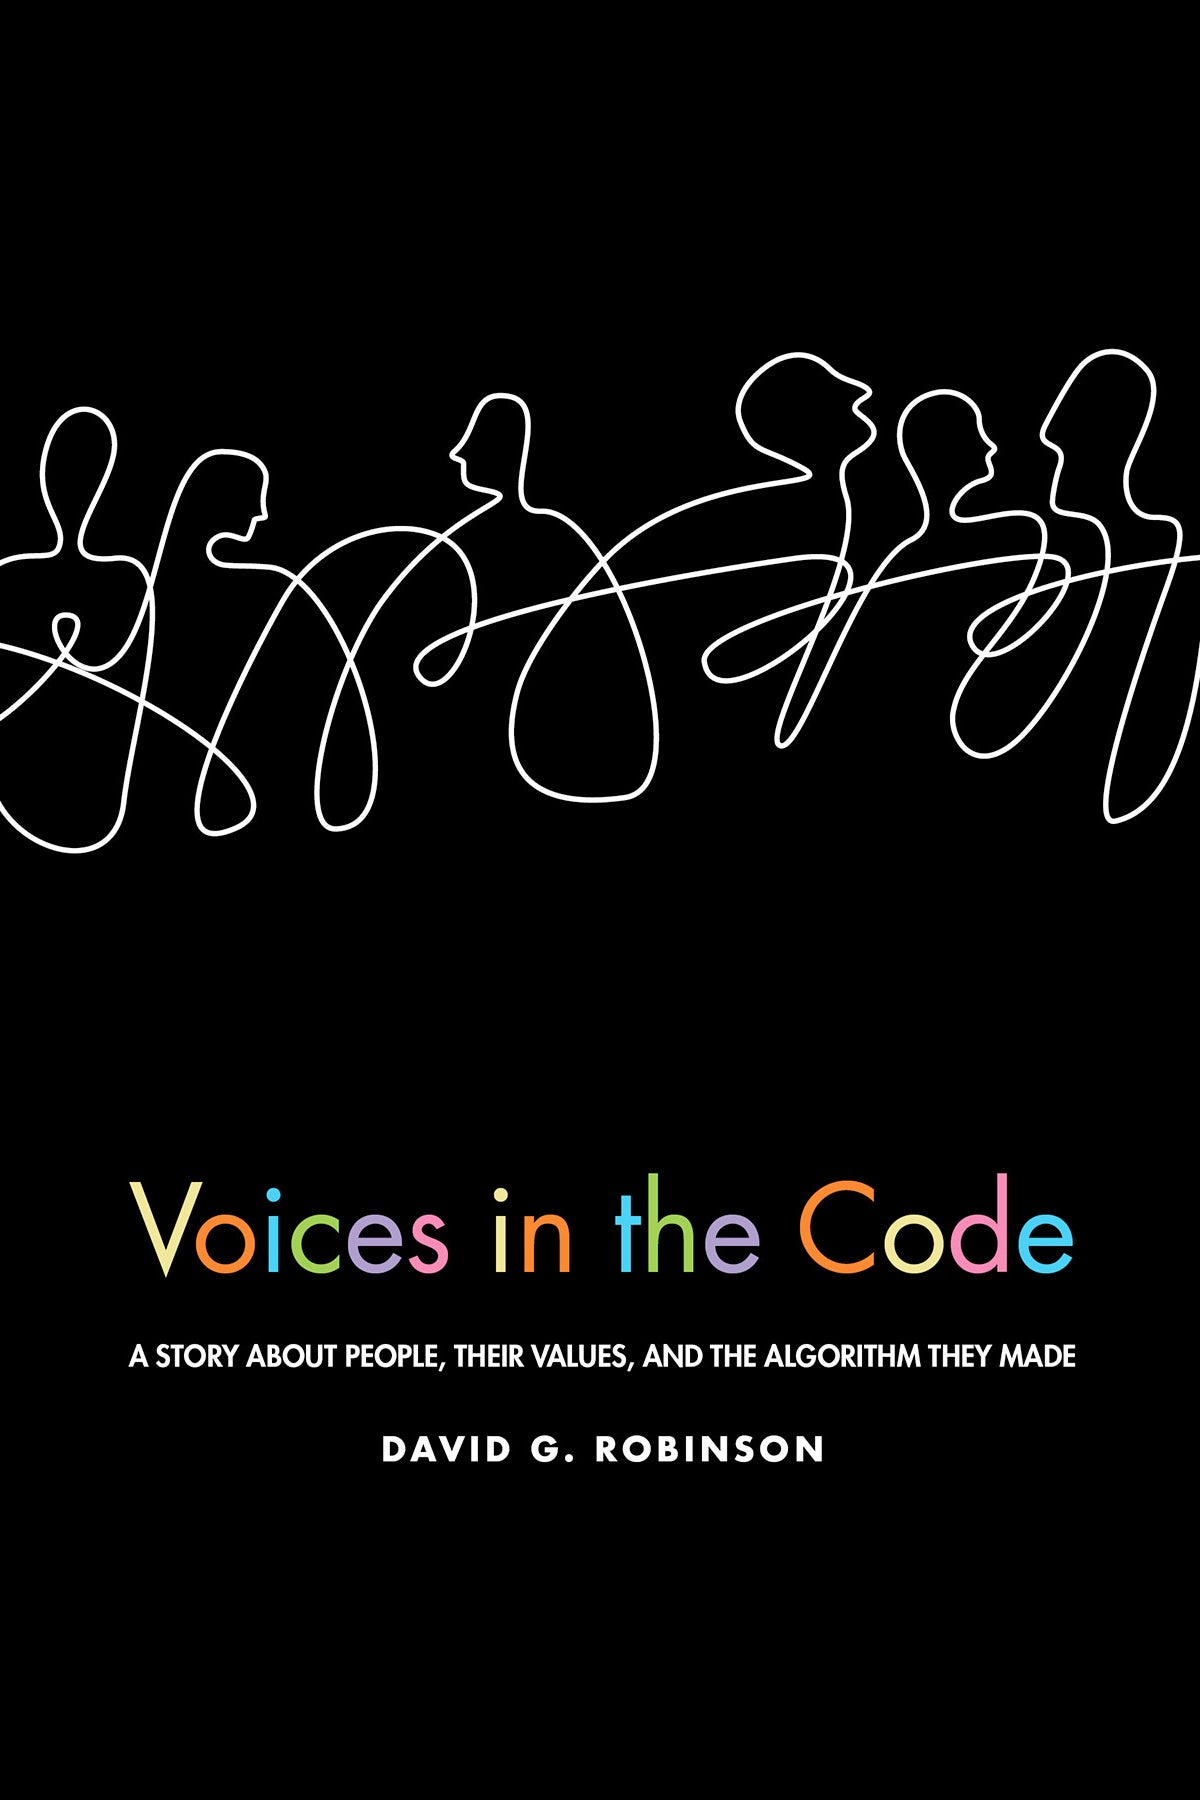 The cover for David G. Robinson's "Voices in the Code," which features rough sketches of people, all drawn using the same white line. Below, the book's title is printed in rainbow colors. The background is black.  